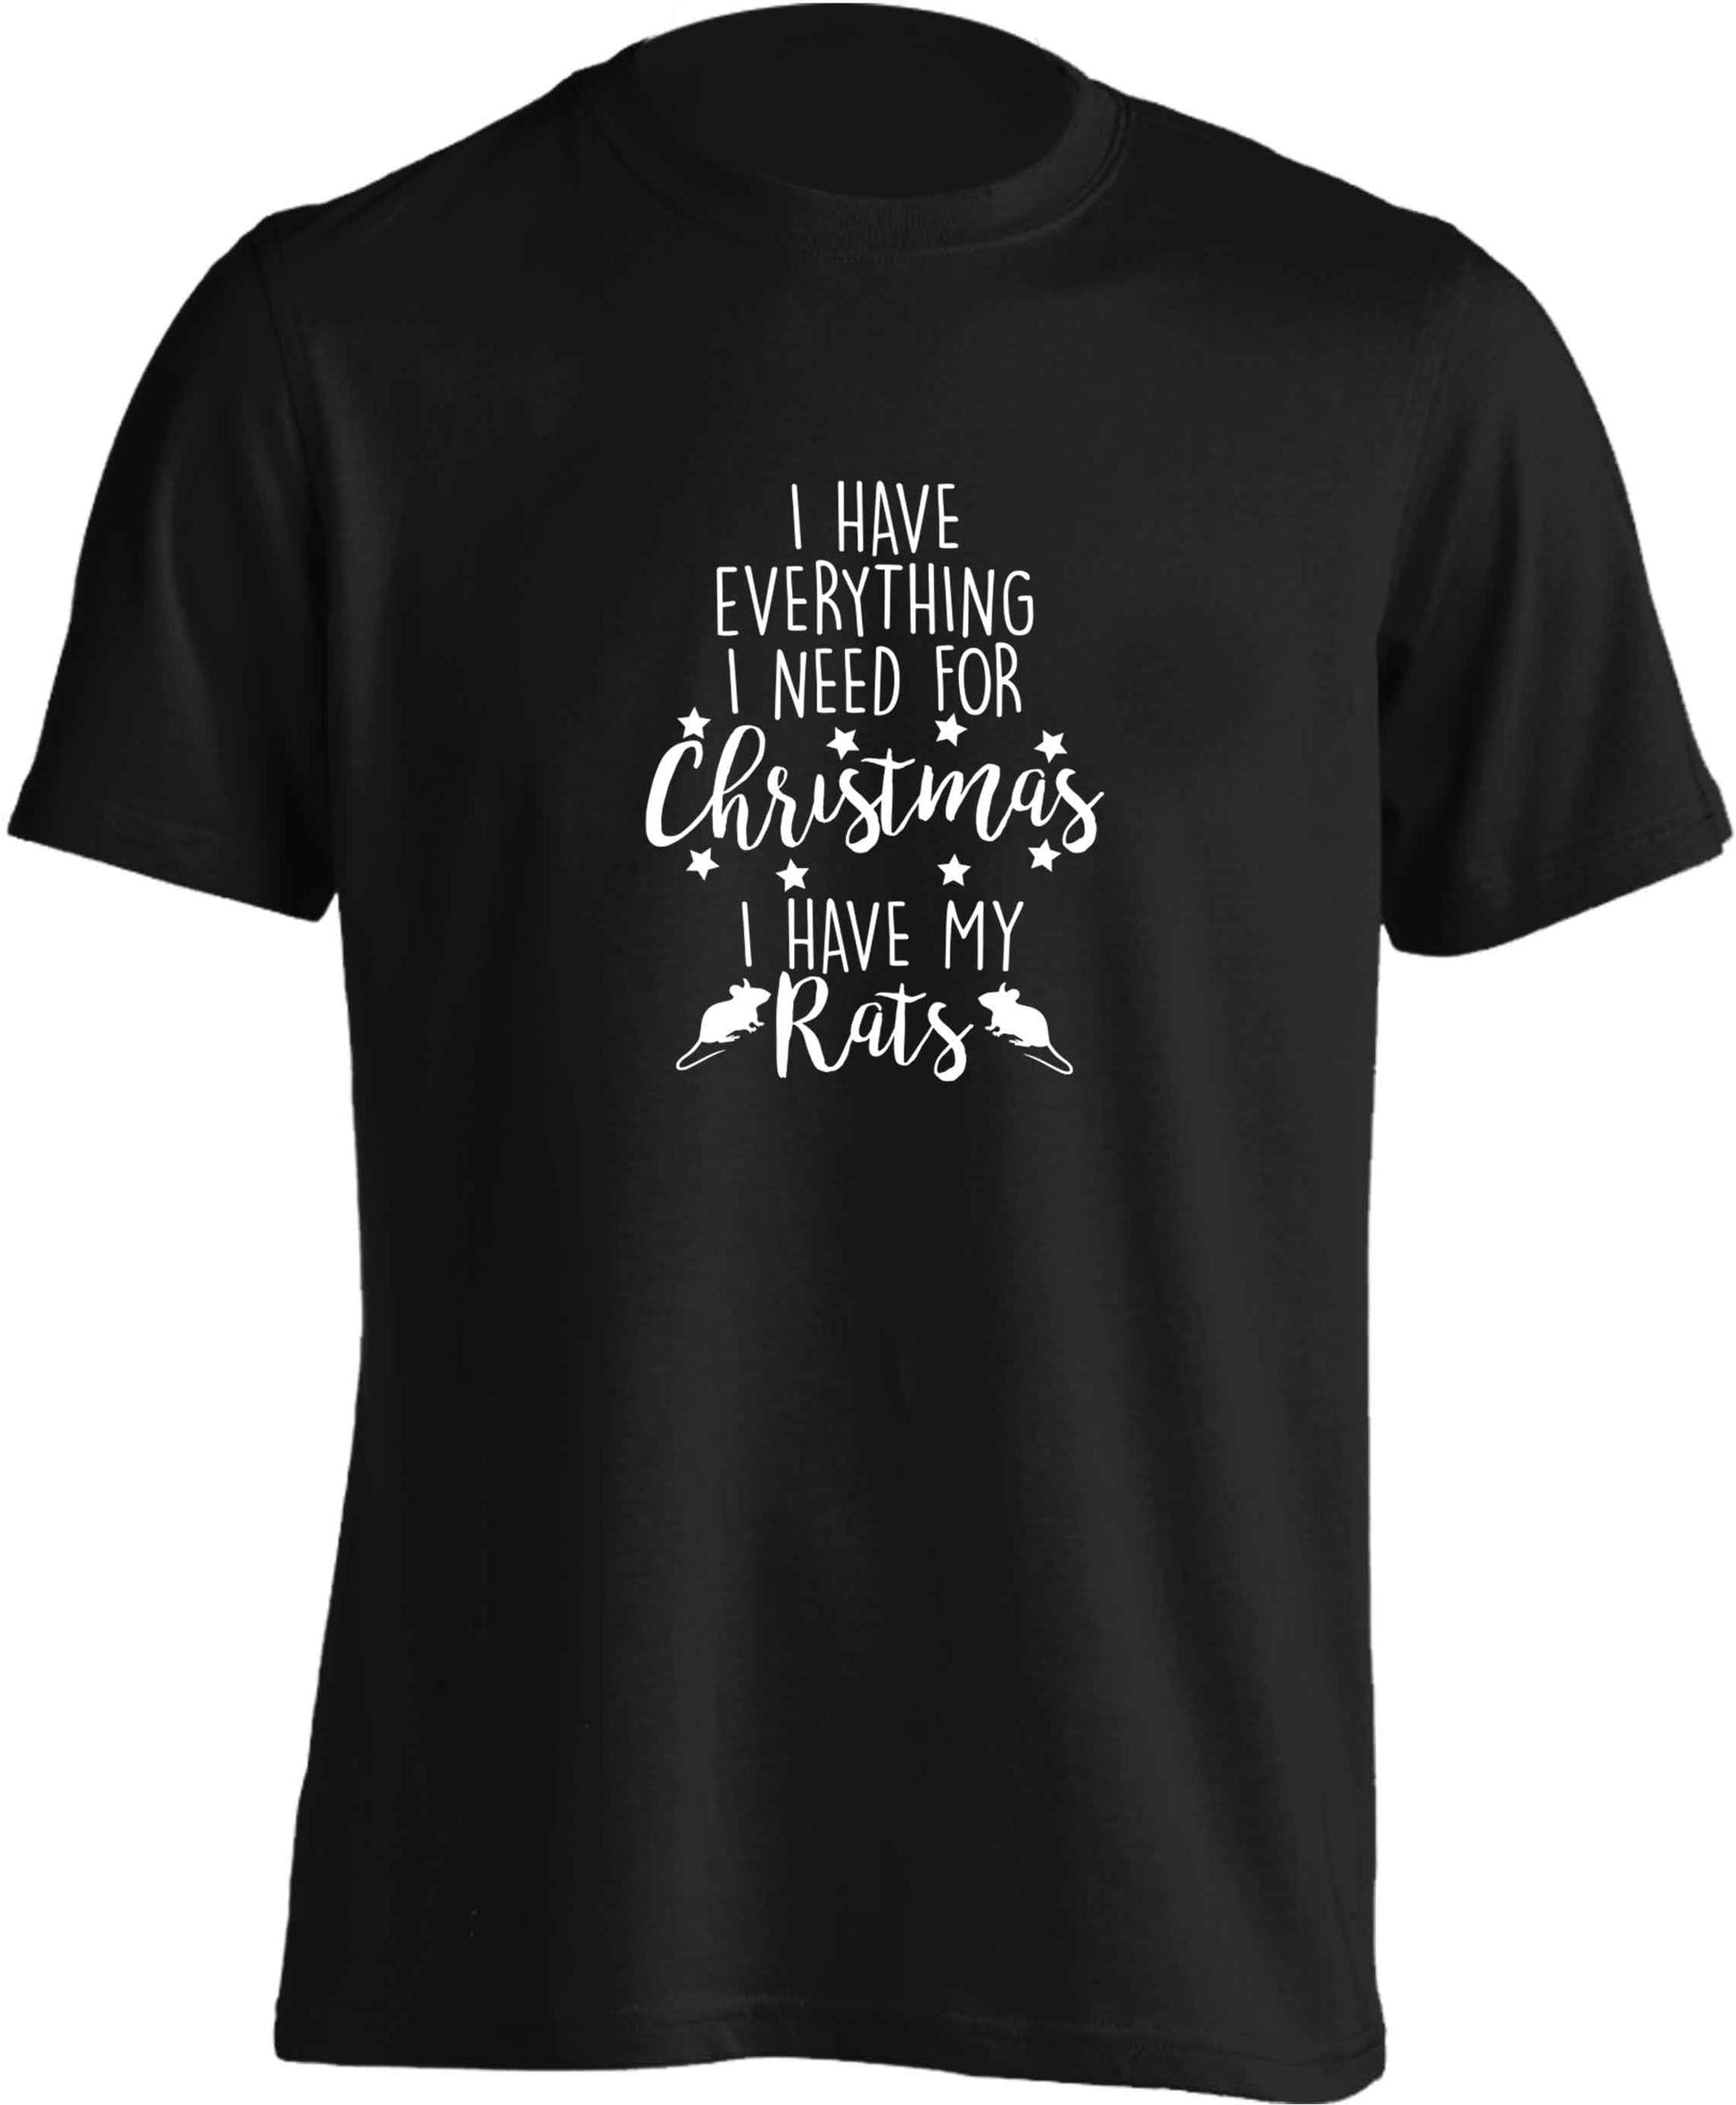 I have everything I need for Christmas I have my rats adults unisex black Tshirt 2XL